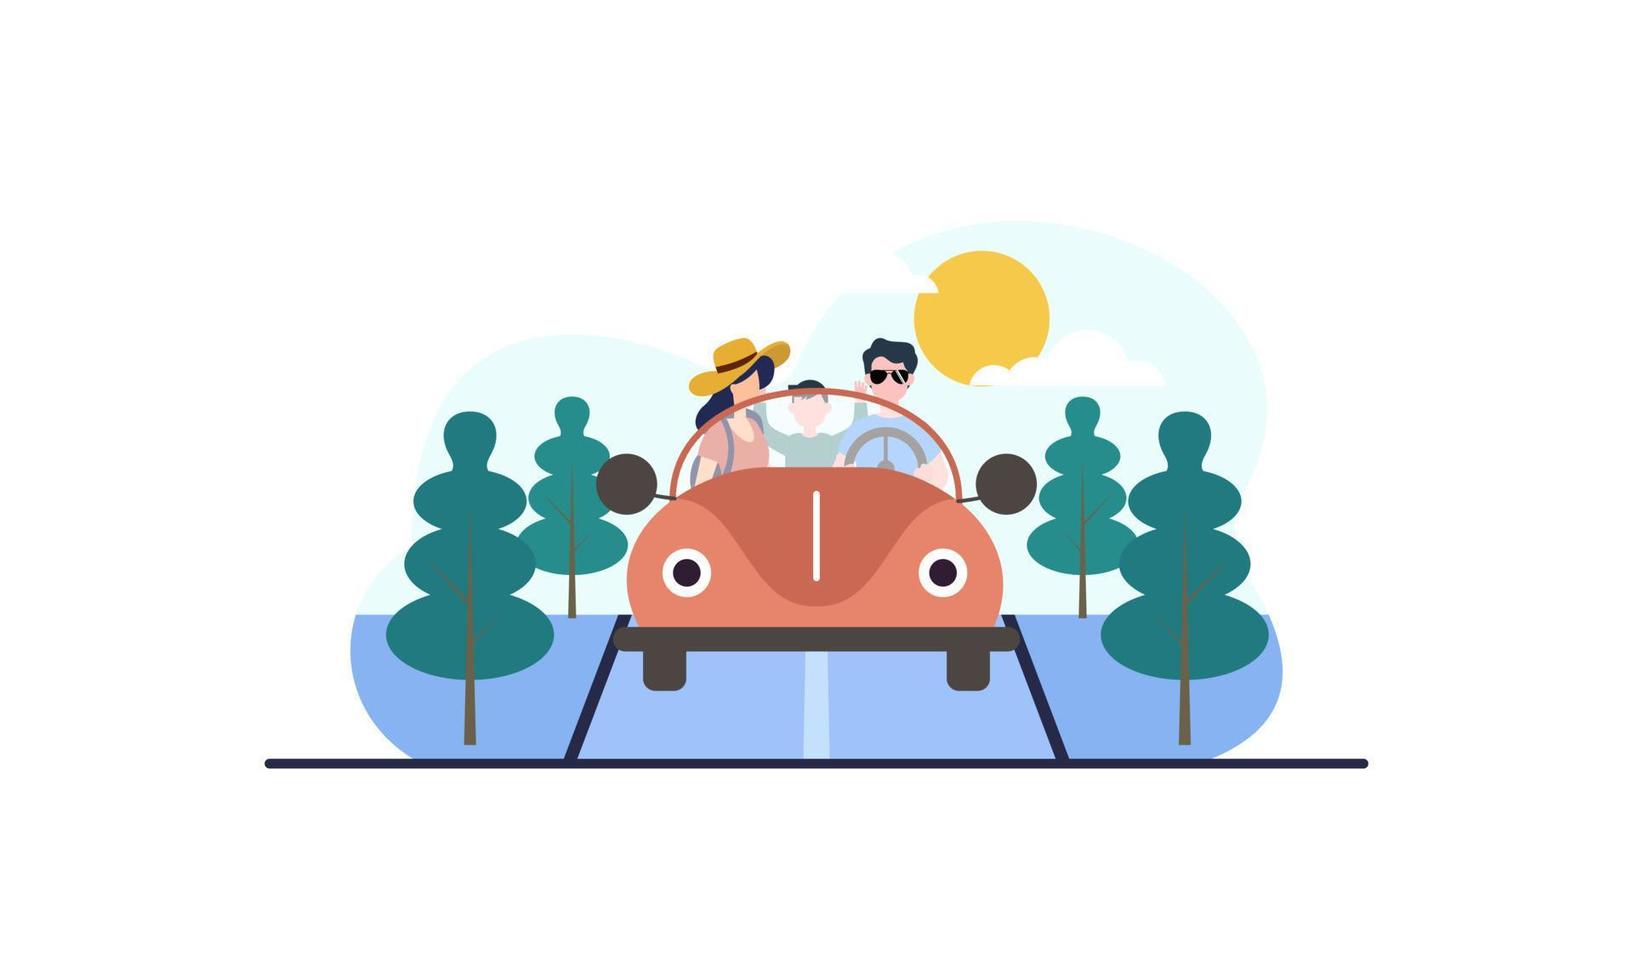 Happy family travelling by car illustration. Travel, road trip, transportation concept vector